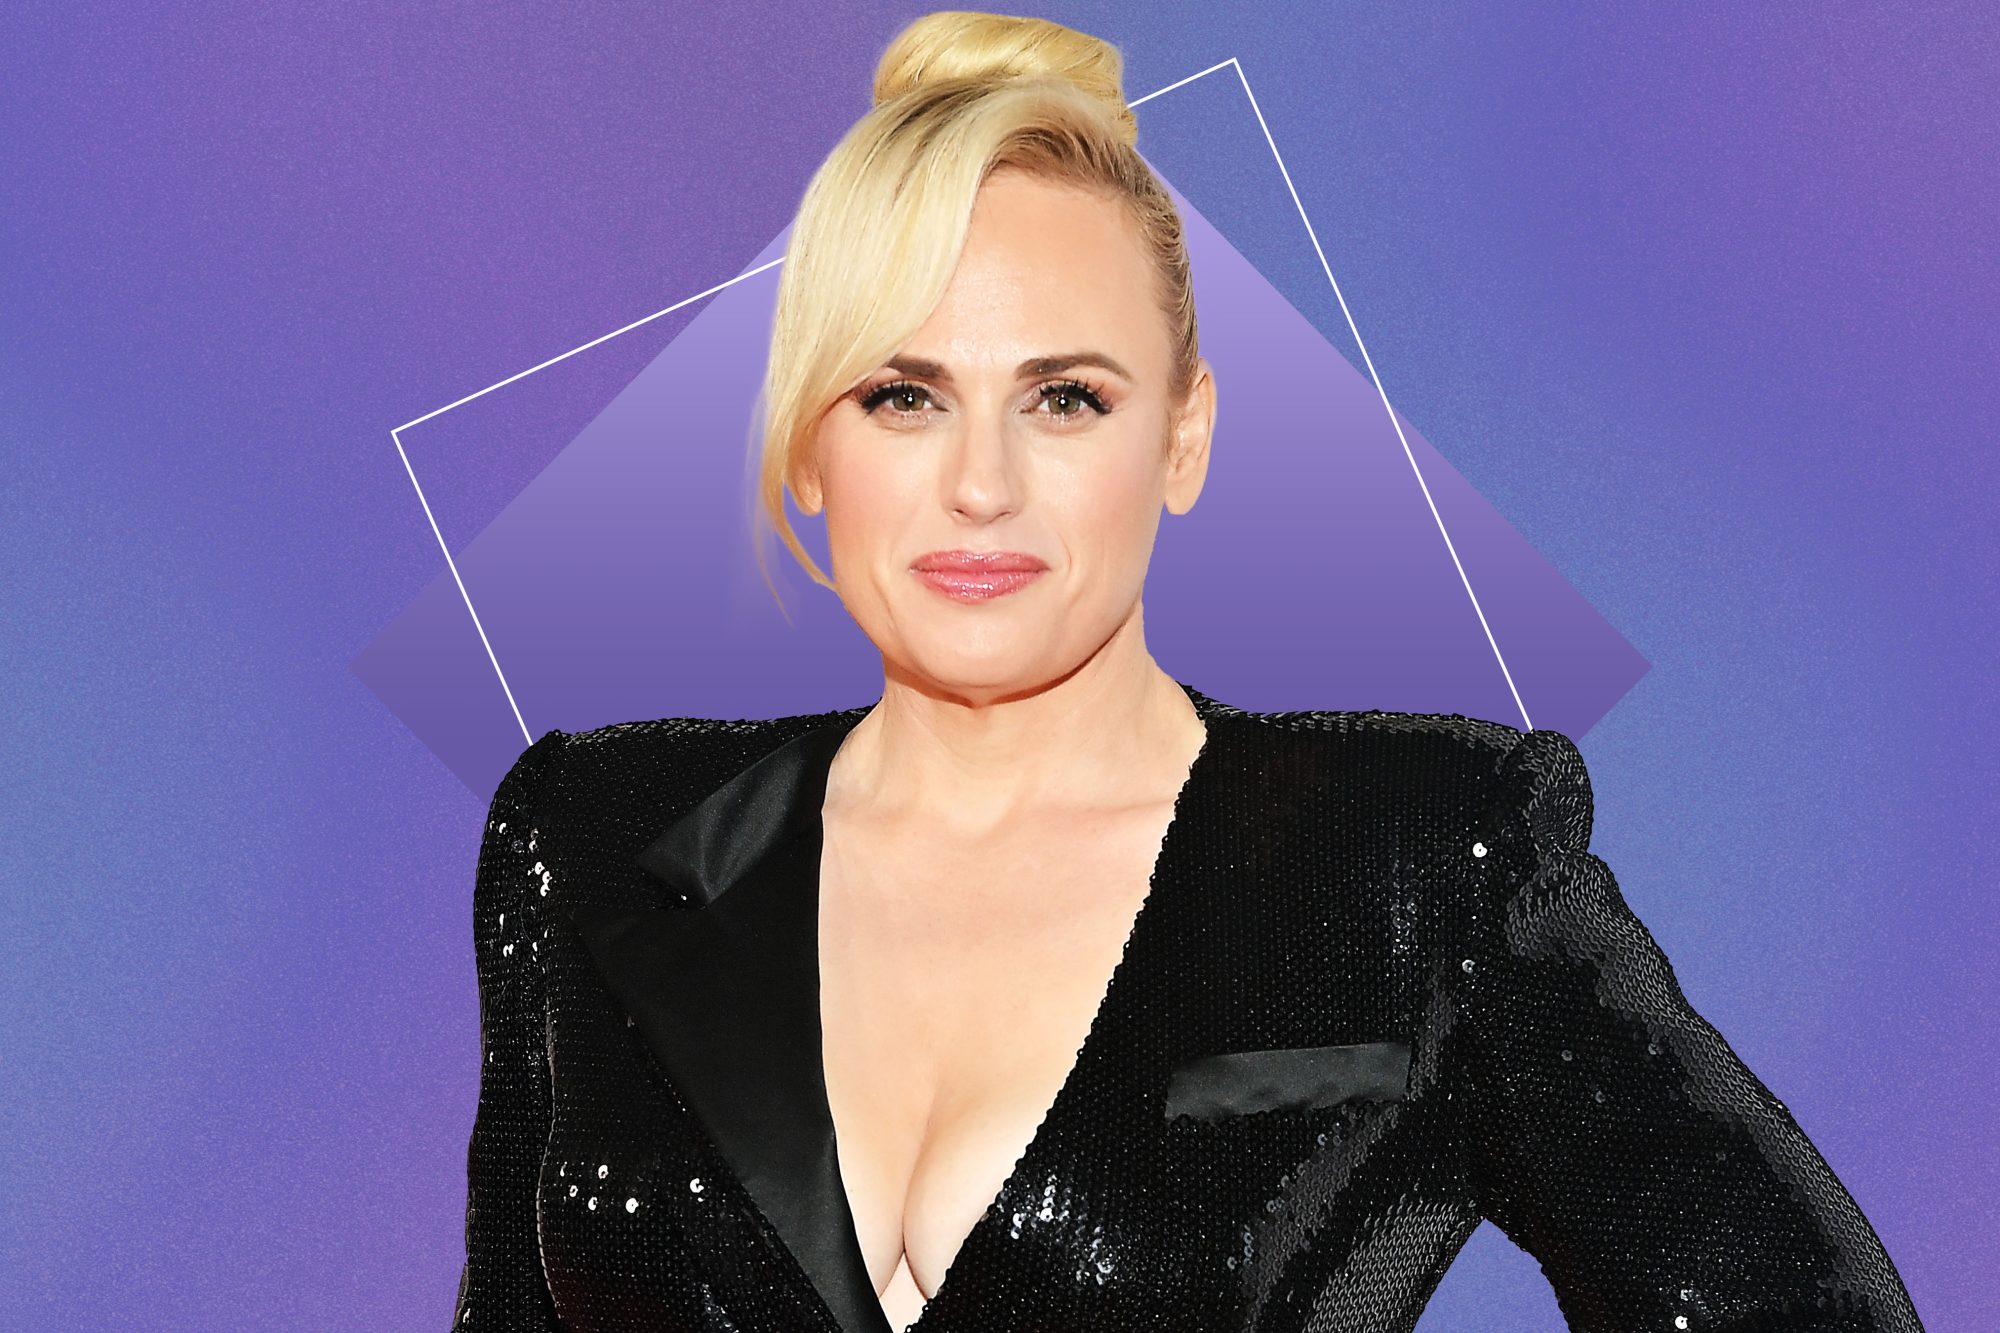 Rebel-Wilson-Shared-That-Not-Everyone-Was-In-Favor-of-Her-Weight-Loss-Goal-GettyImages-1343972418